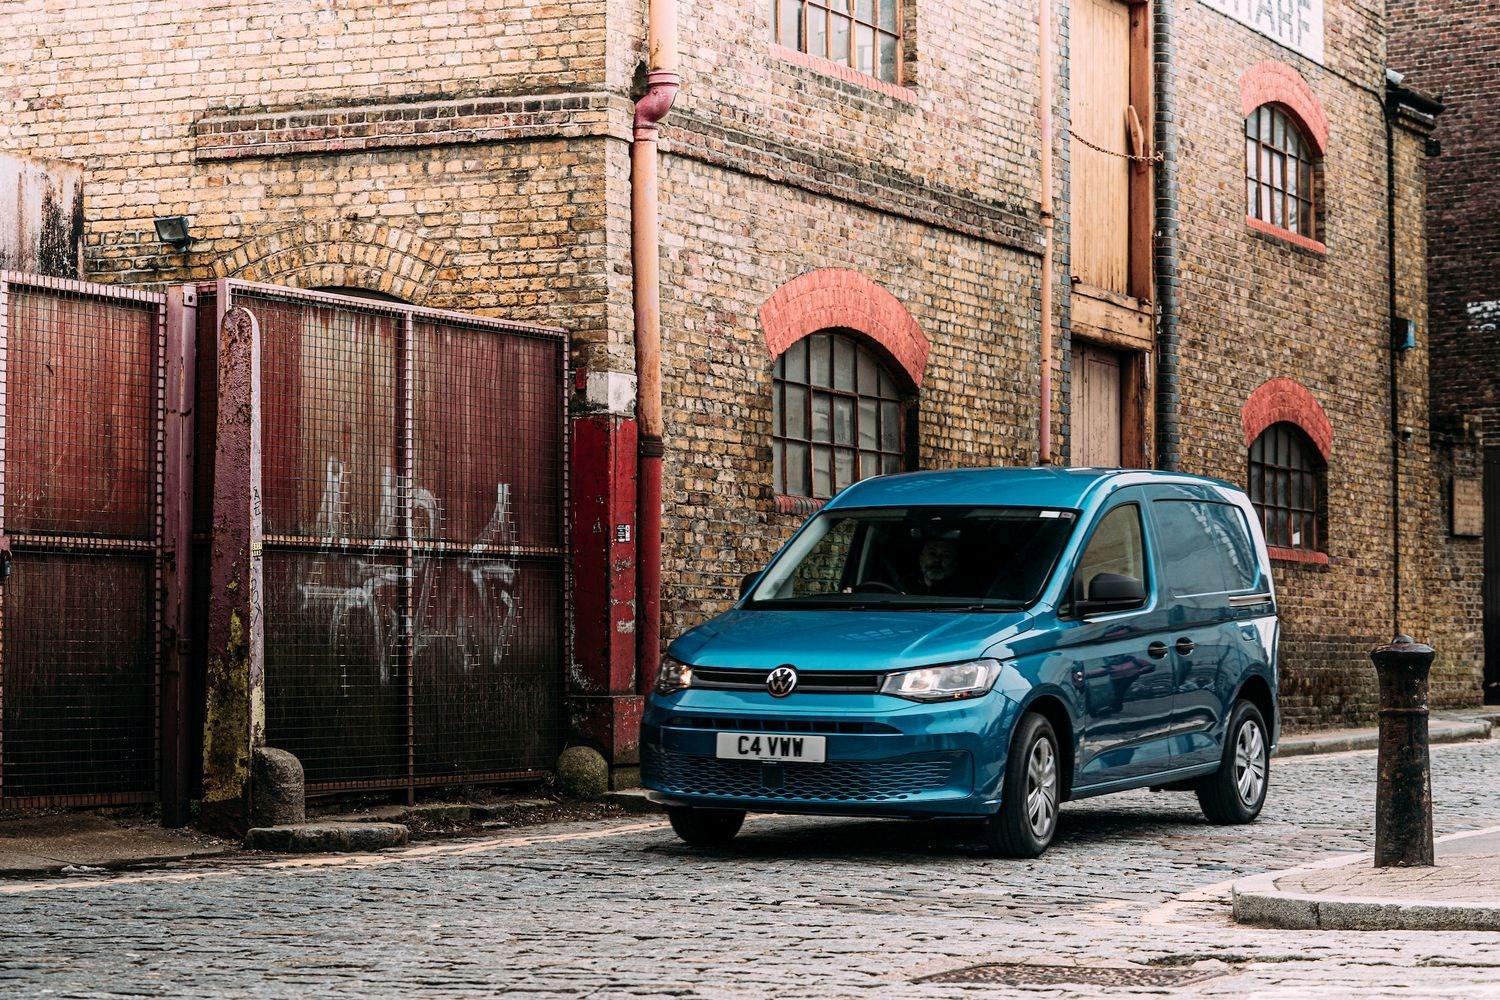 Blue Volkswagen Caddy parked on a city street with red brick building and cobbled streets.